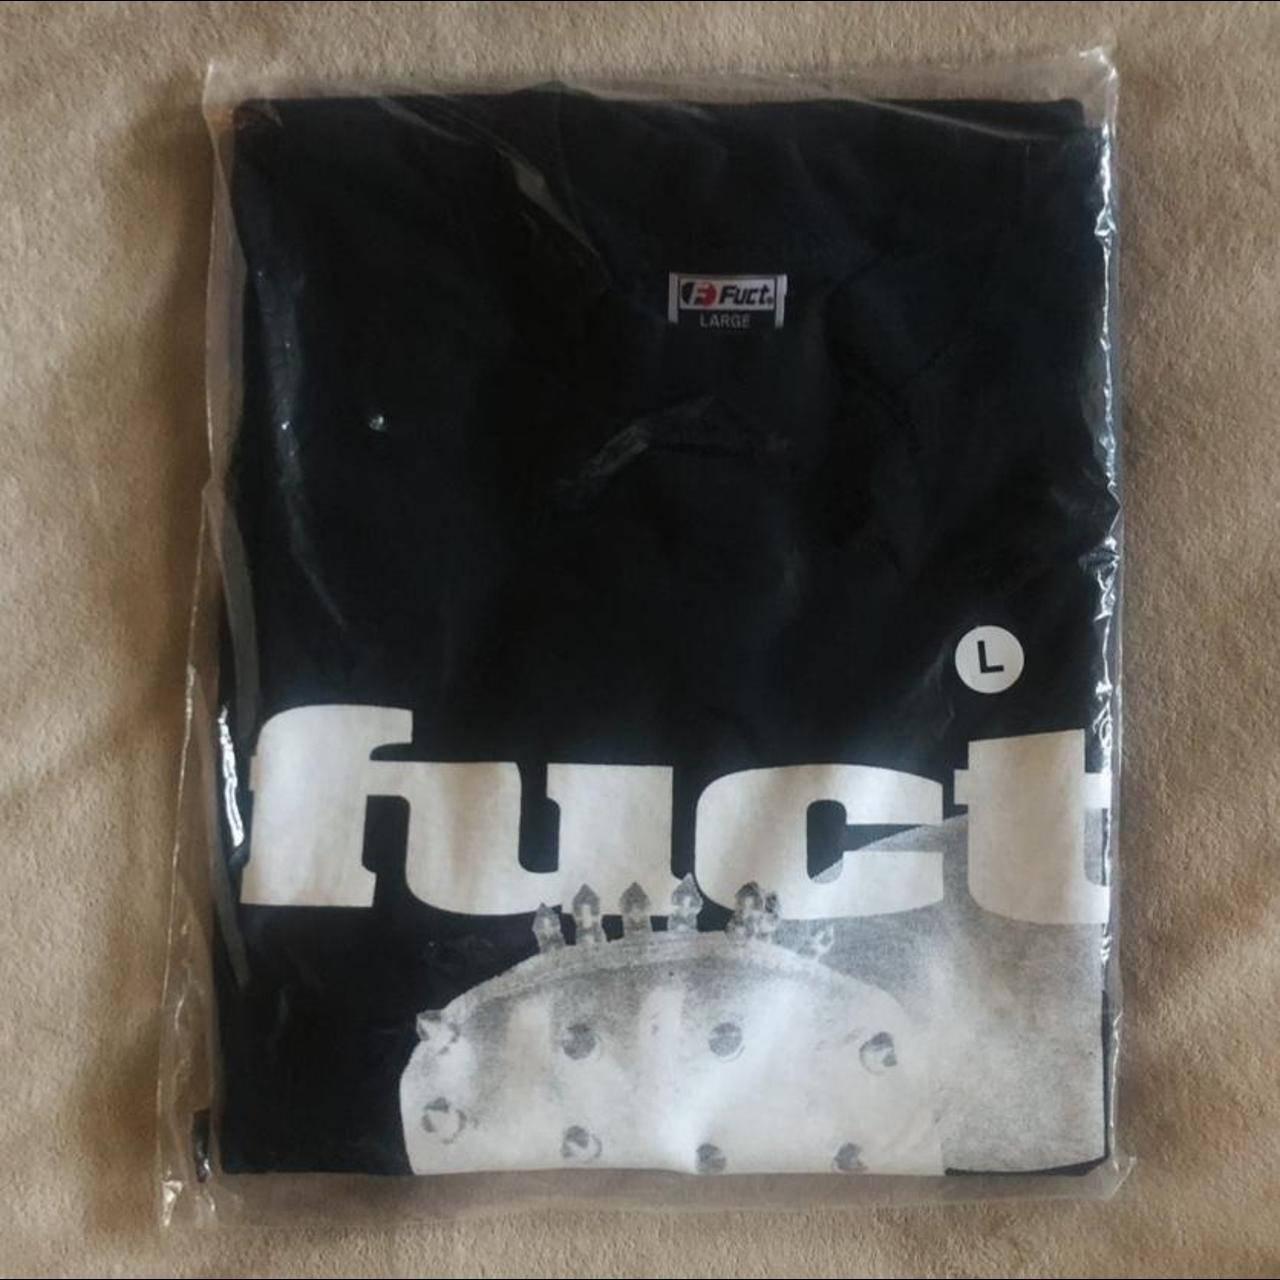 Product Image 1 - FUCT Fist Tee 👊🏼

‼️ DEADSTOCK